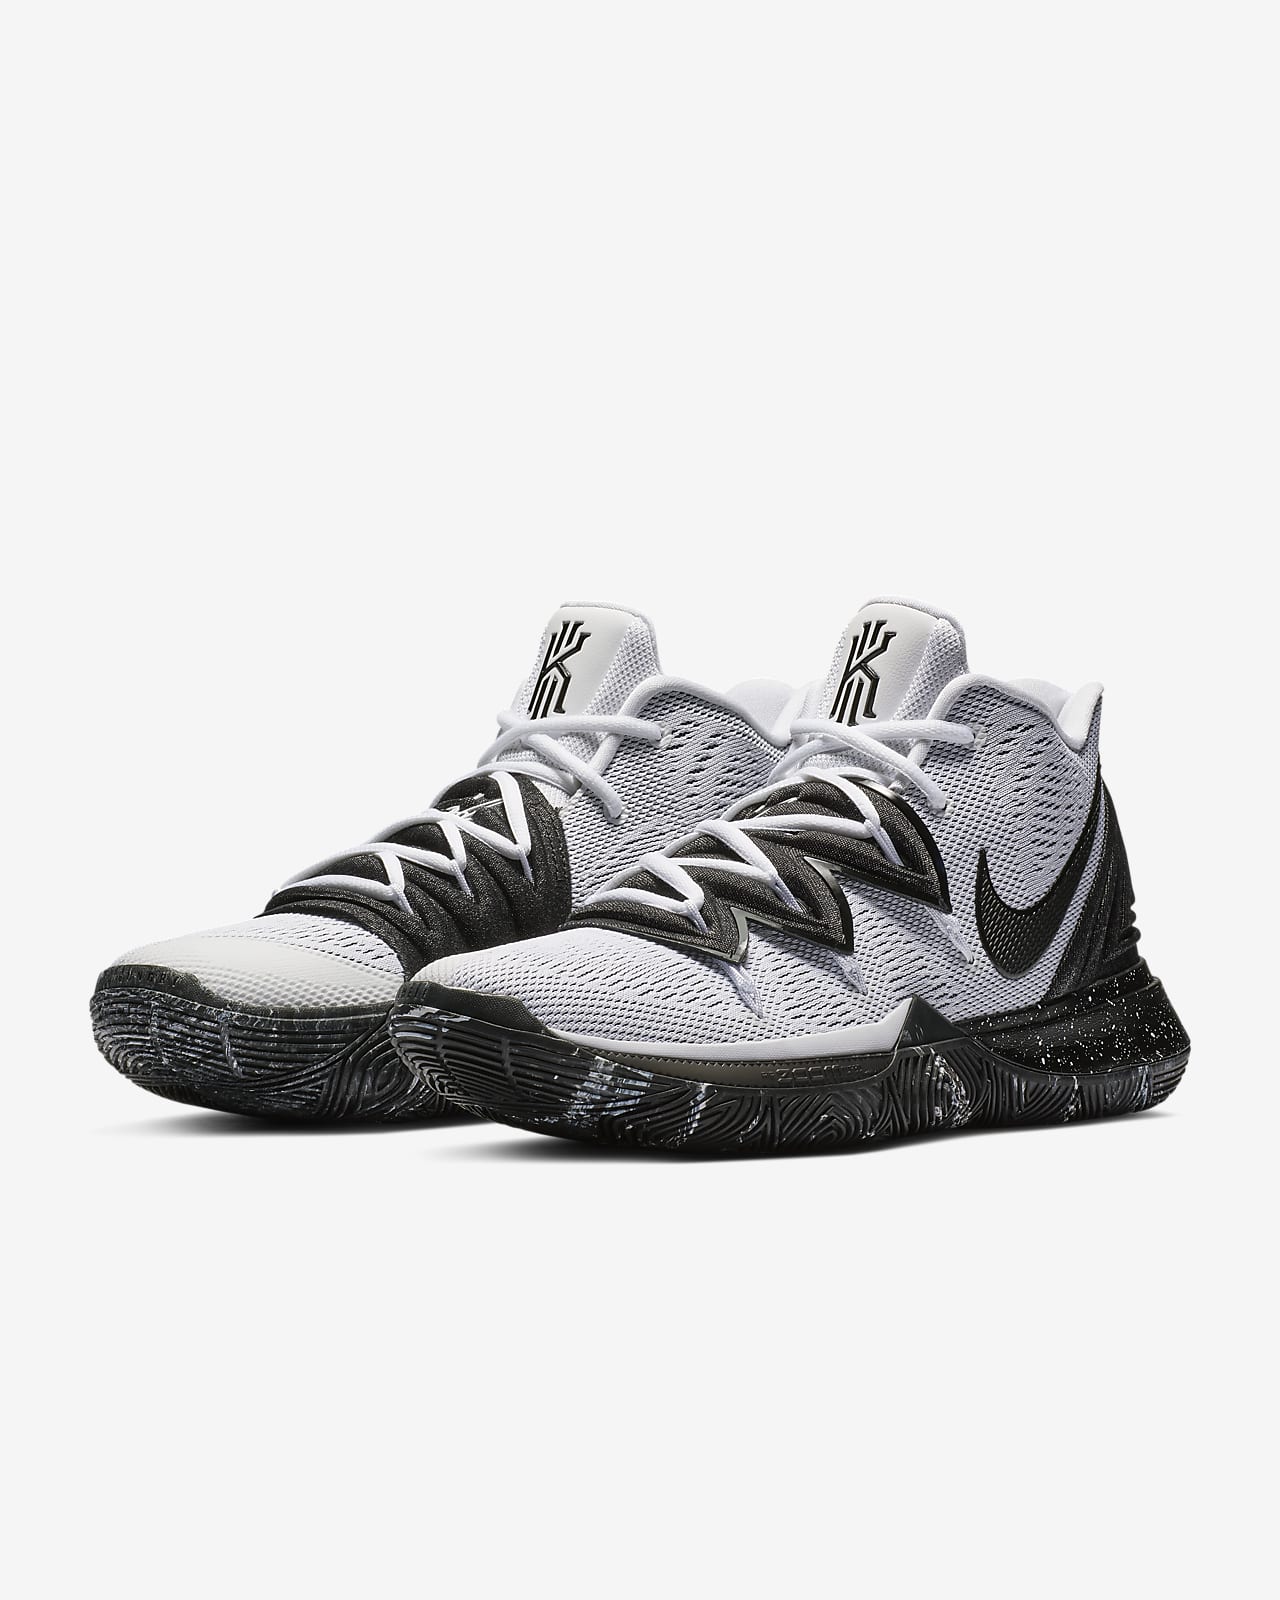 kyrie 5 shoes price